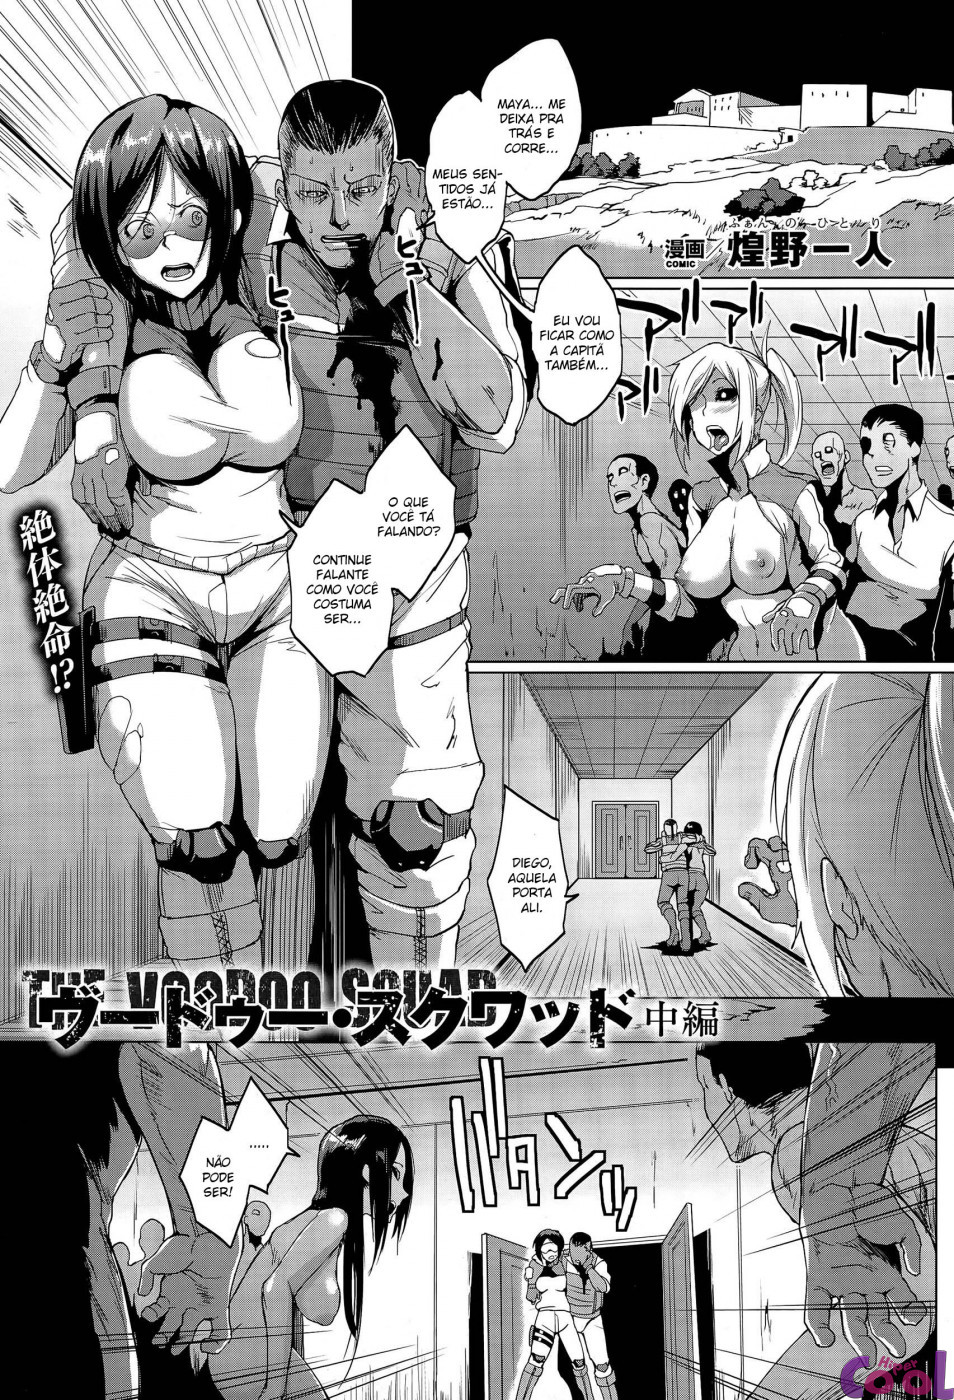 voodoo-squad-chuuhen-chapter-01-page-01.jpg